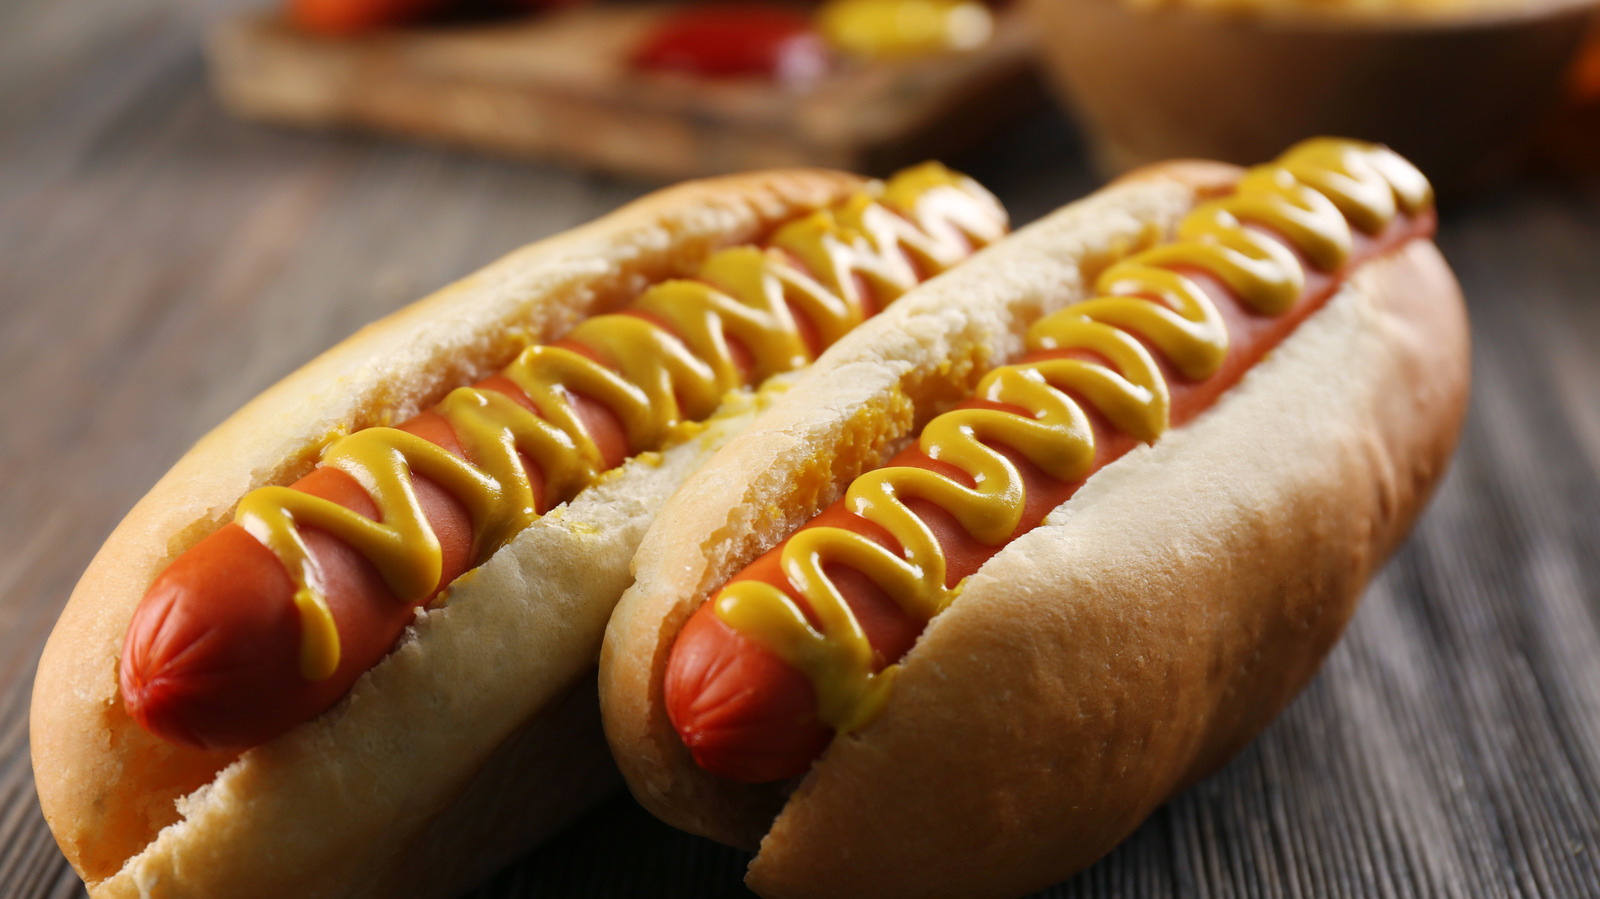 The Do's and Don'ts of Cooking Hot Dogs